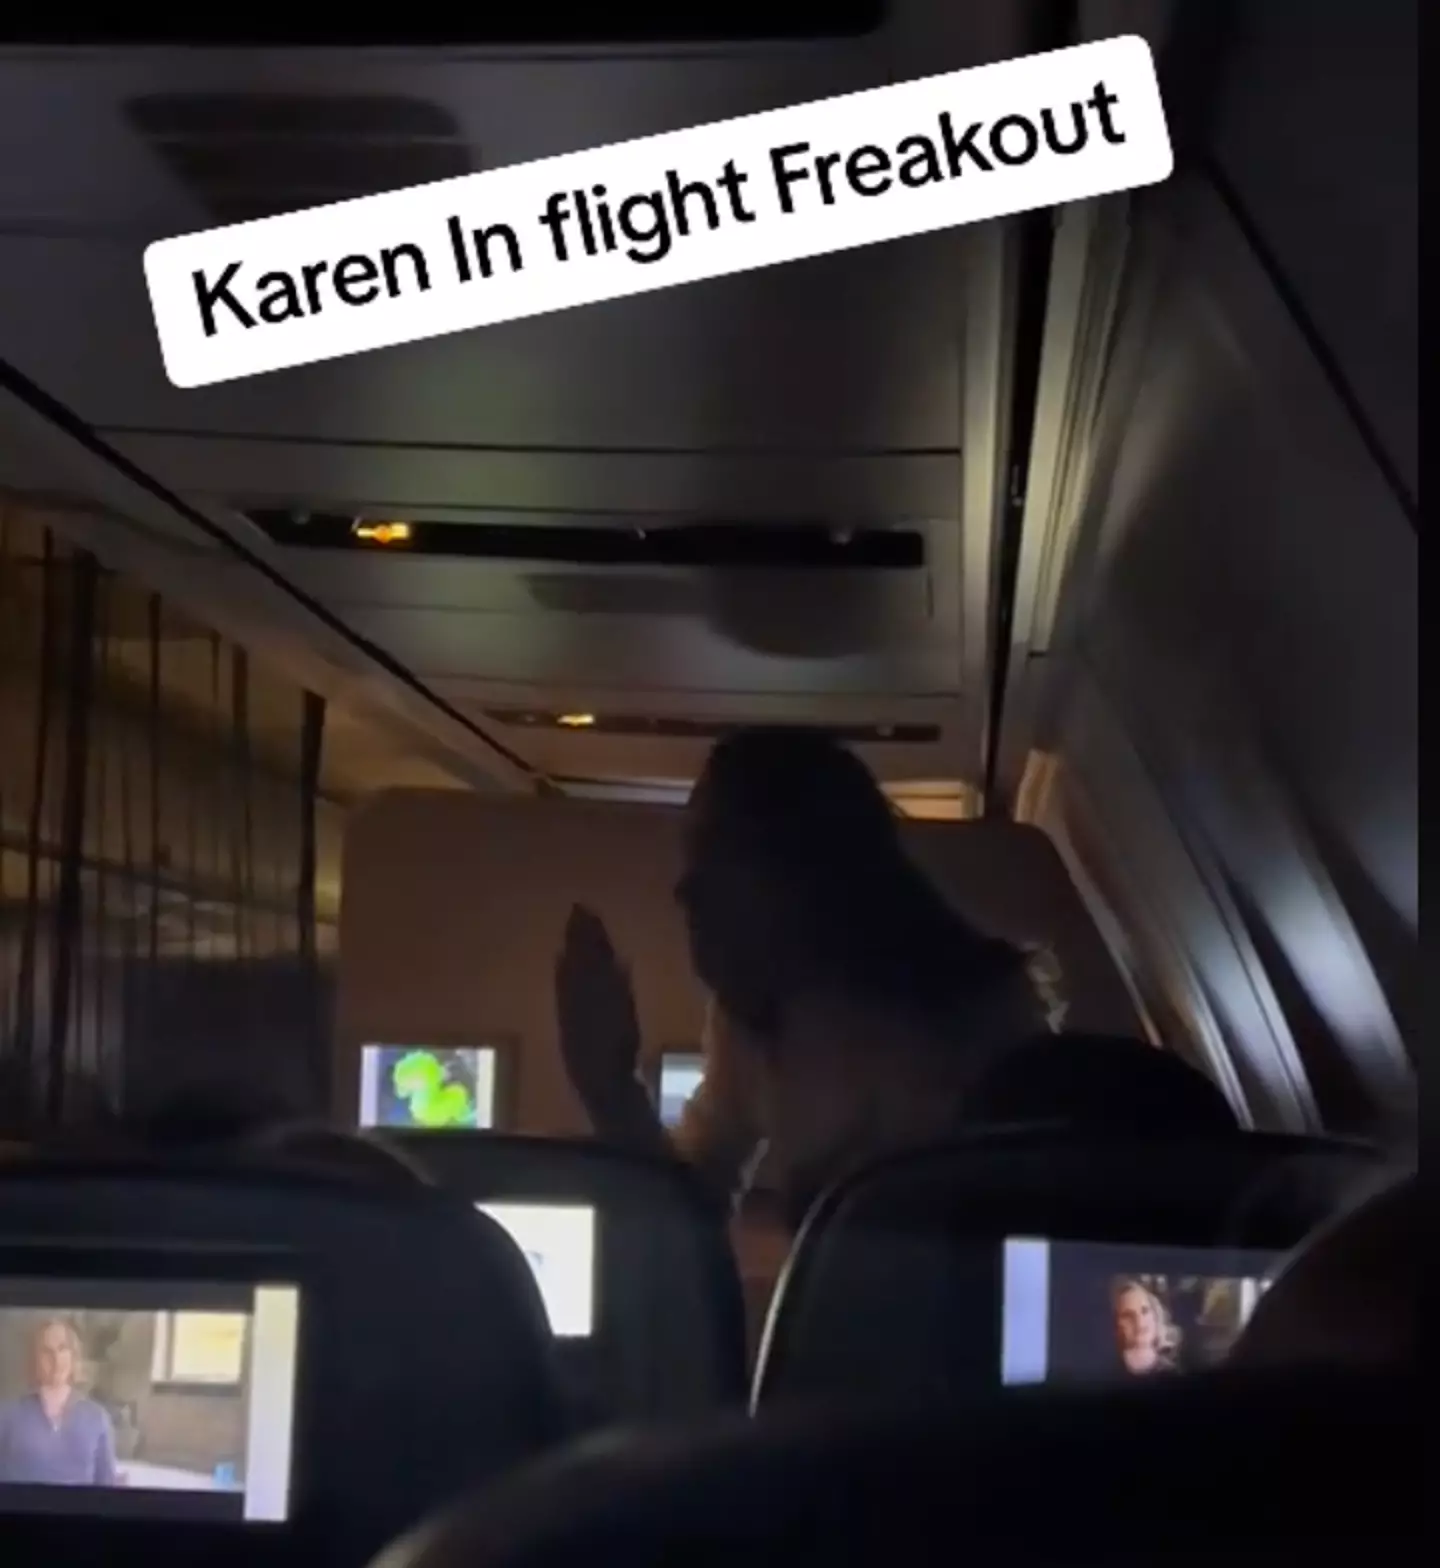 The first video shows the woman having a go at another passenger.